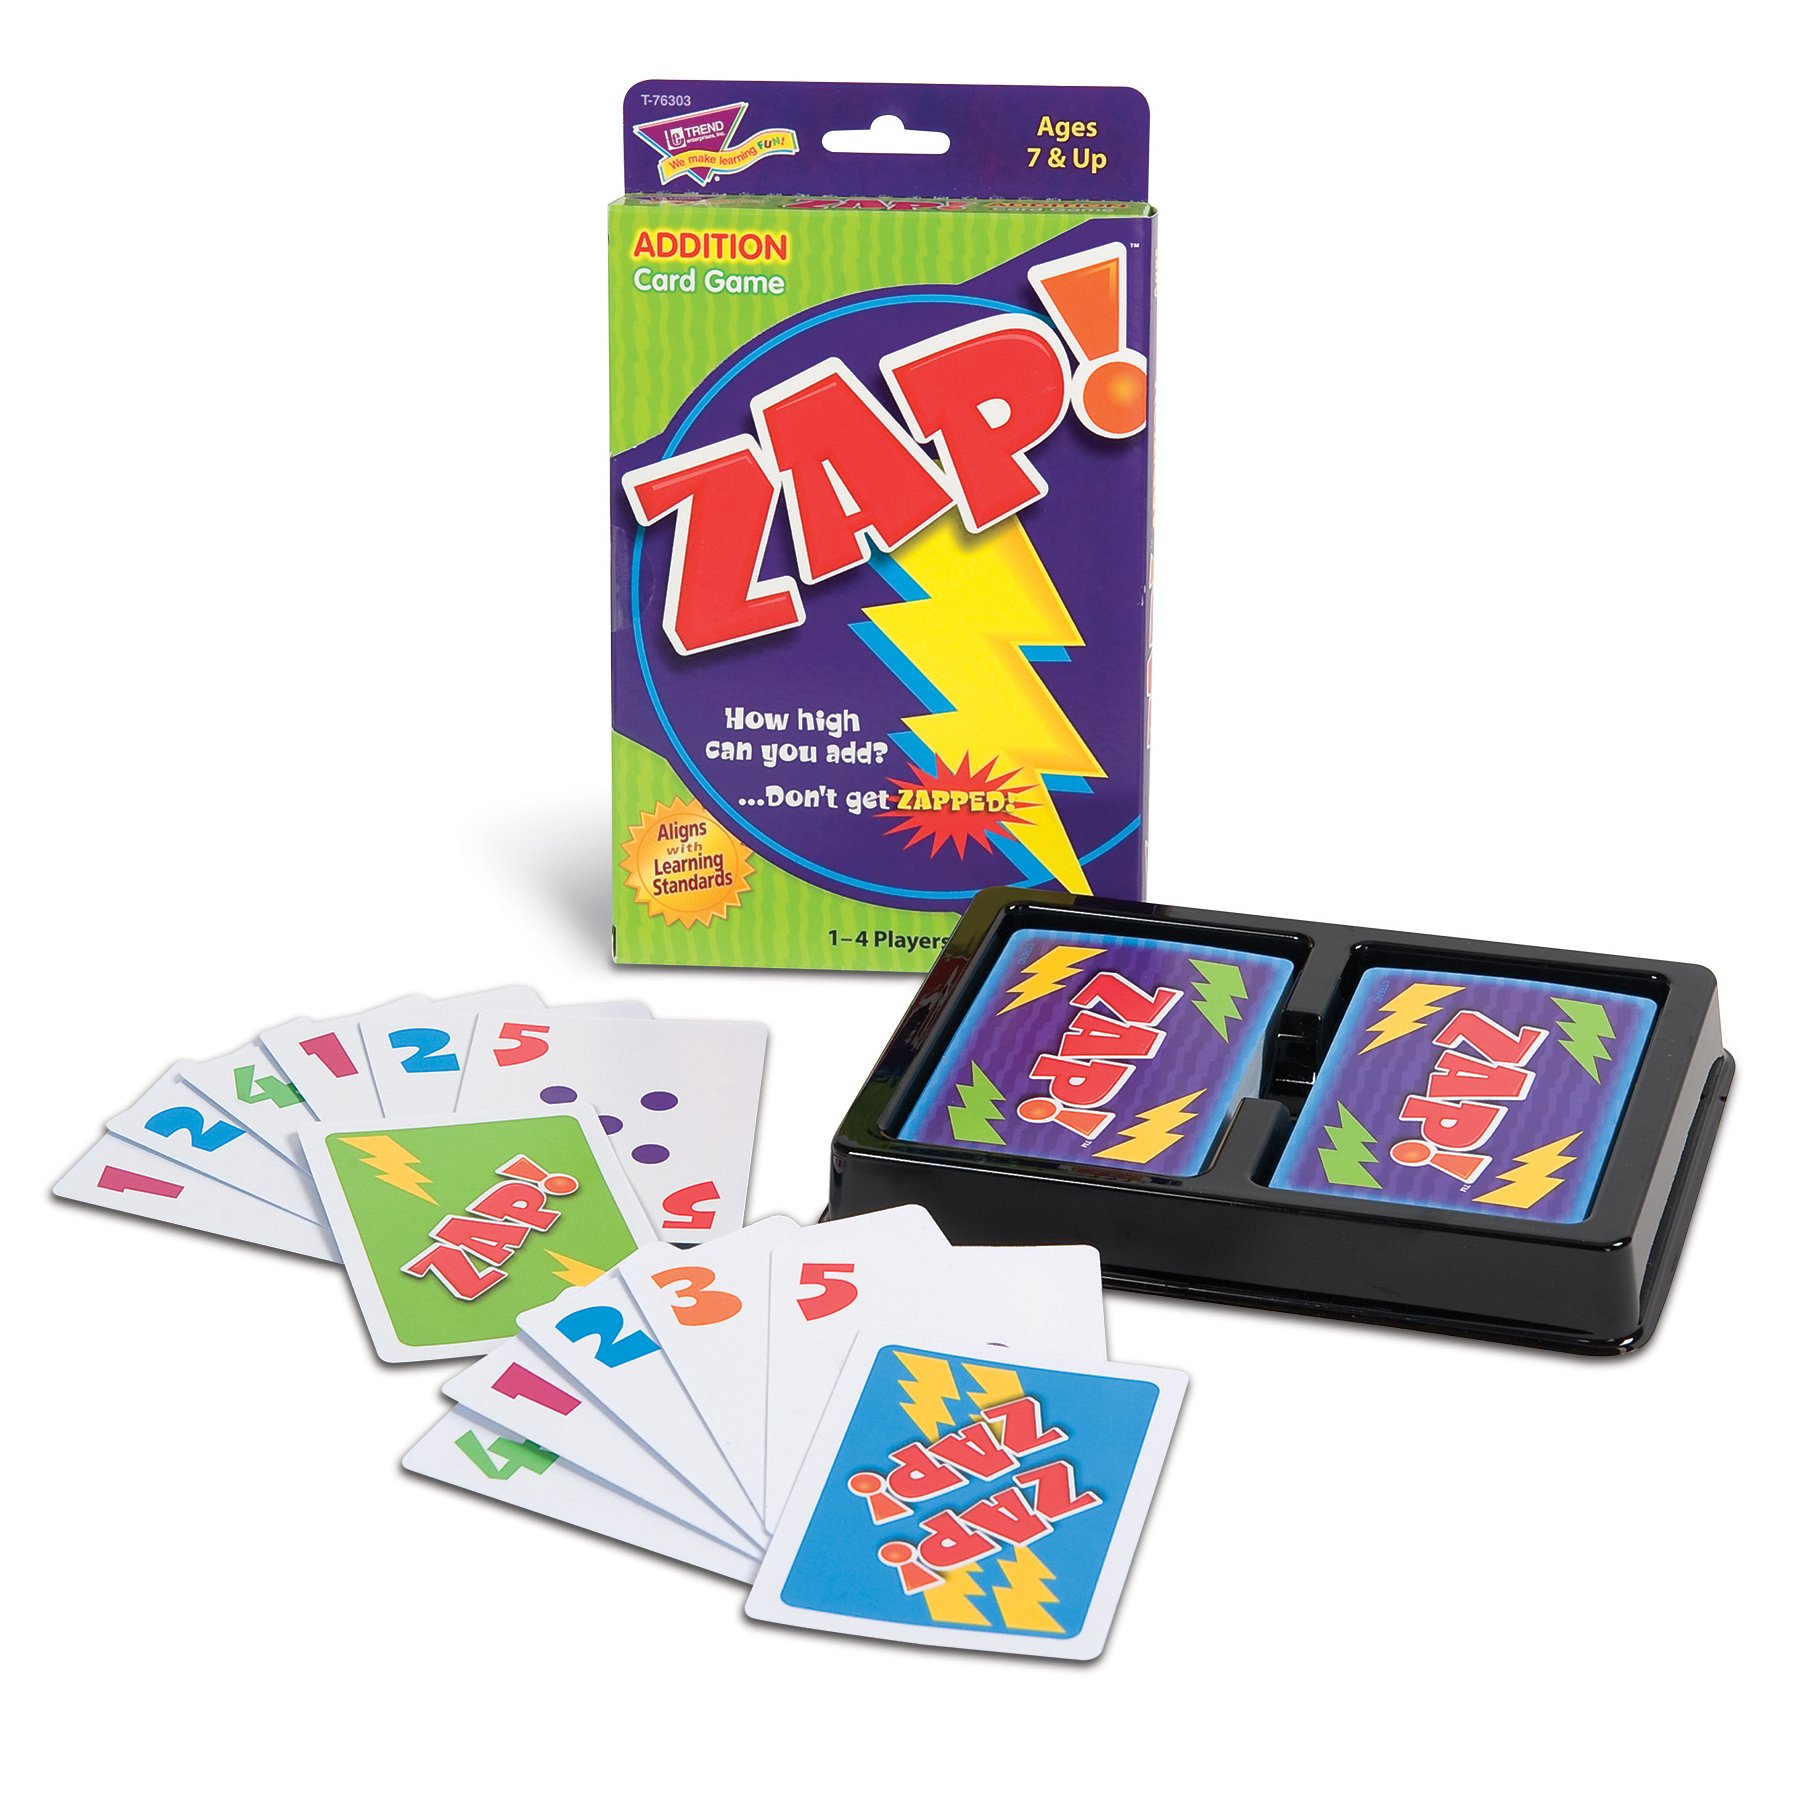 TREND ENTERPRISES: Zap! Addition Card Game, Reinforce Addition Skills, Build Subtraction Skills, Introduce Probability and Chance, Fun for All Ages, 1 to 4 Players, For Ages 7 and Up